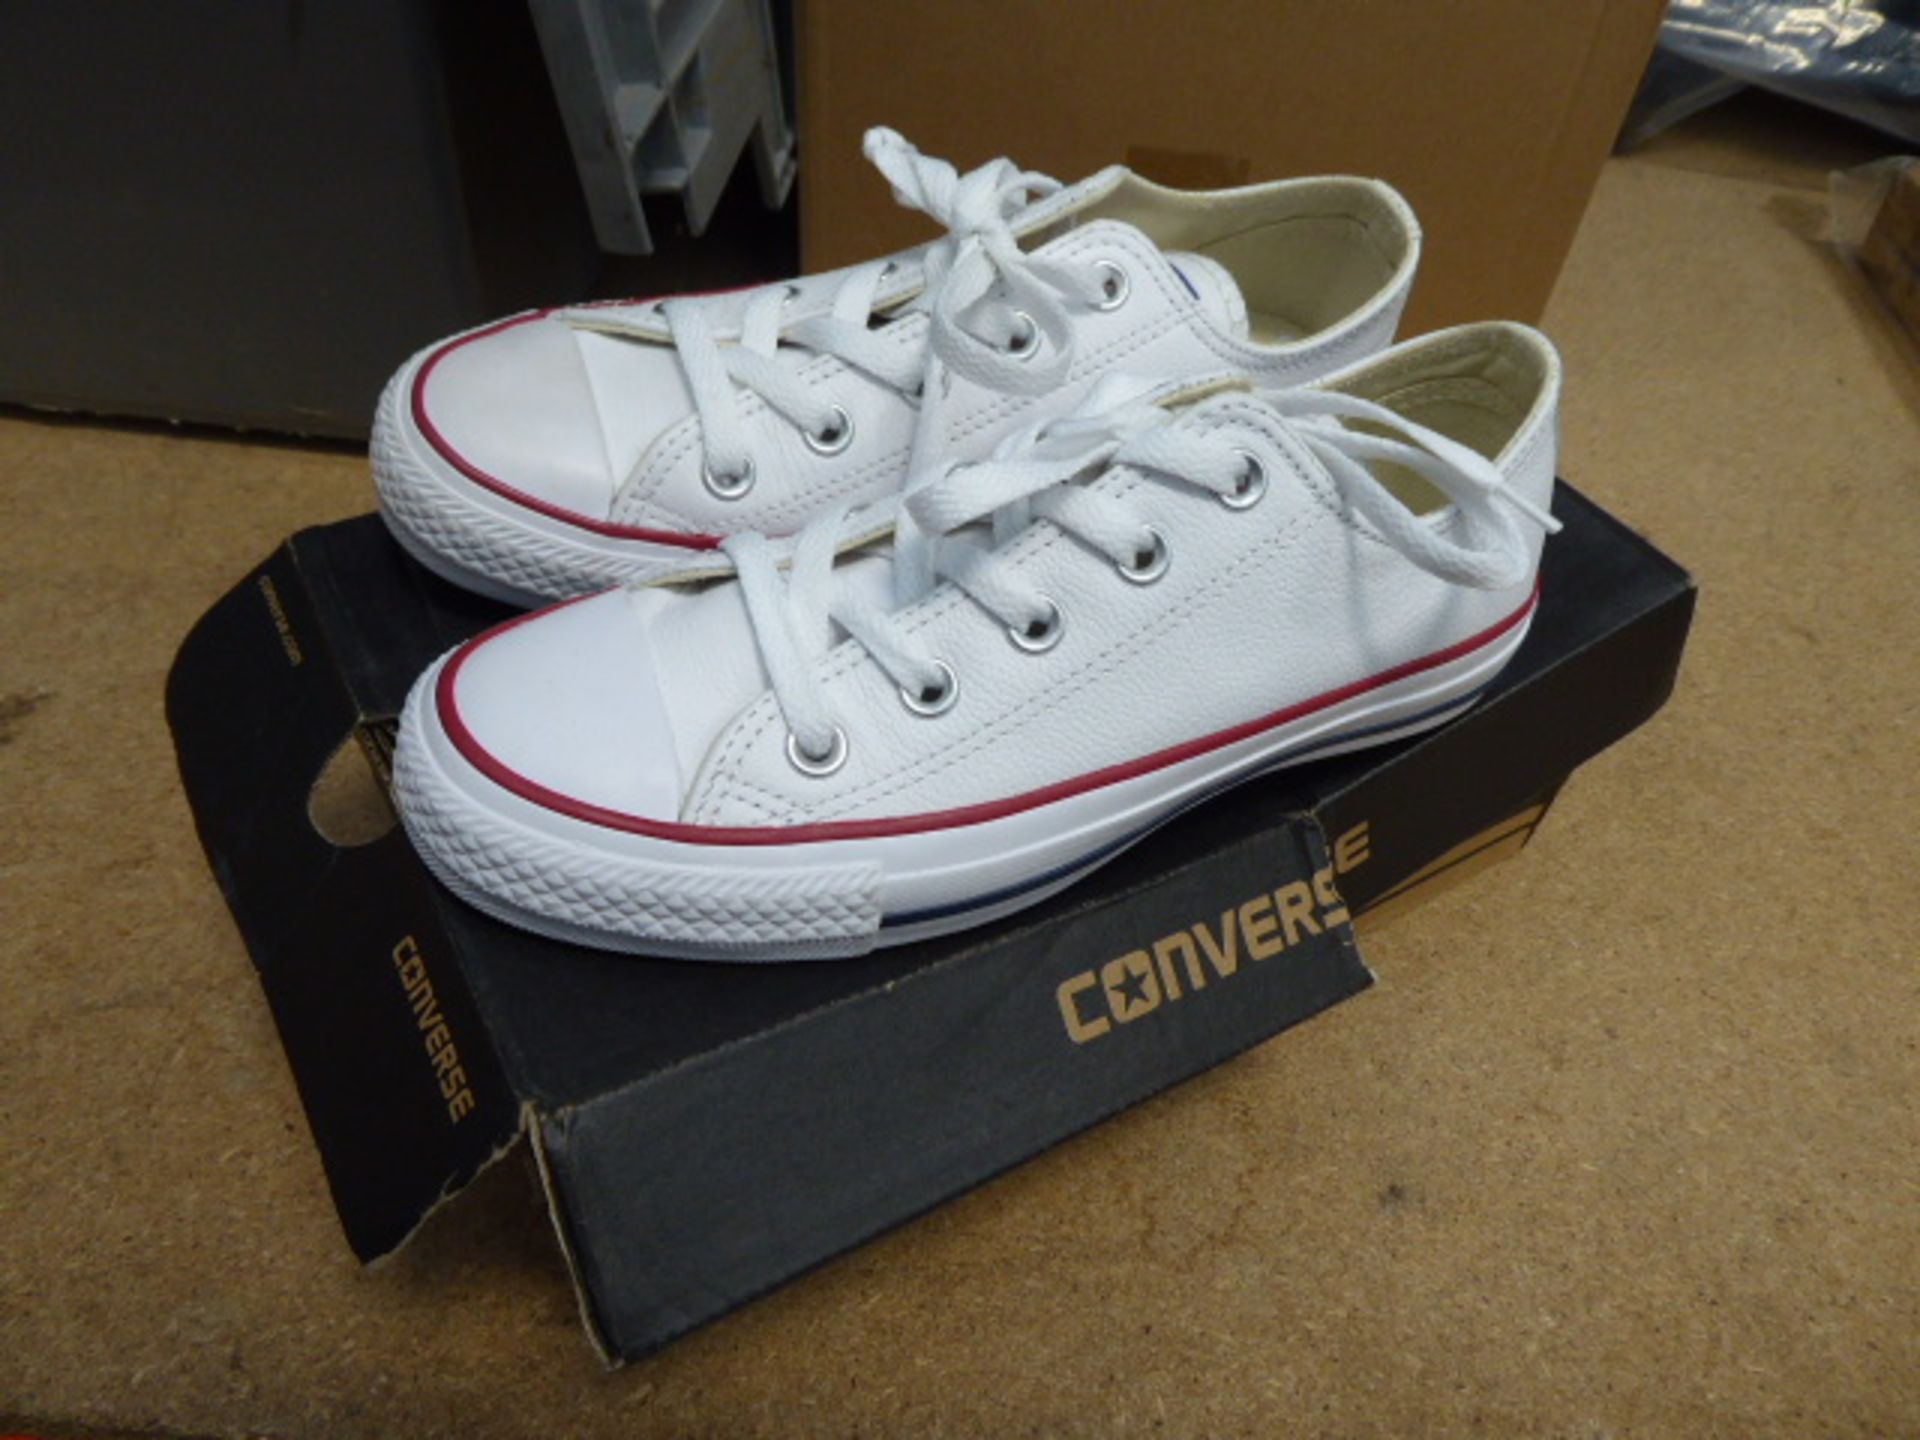 Boxed pair of ladies Converse trainers in white, size 3